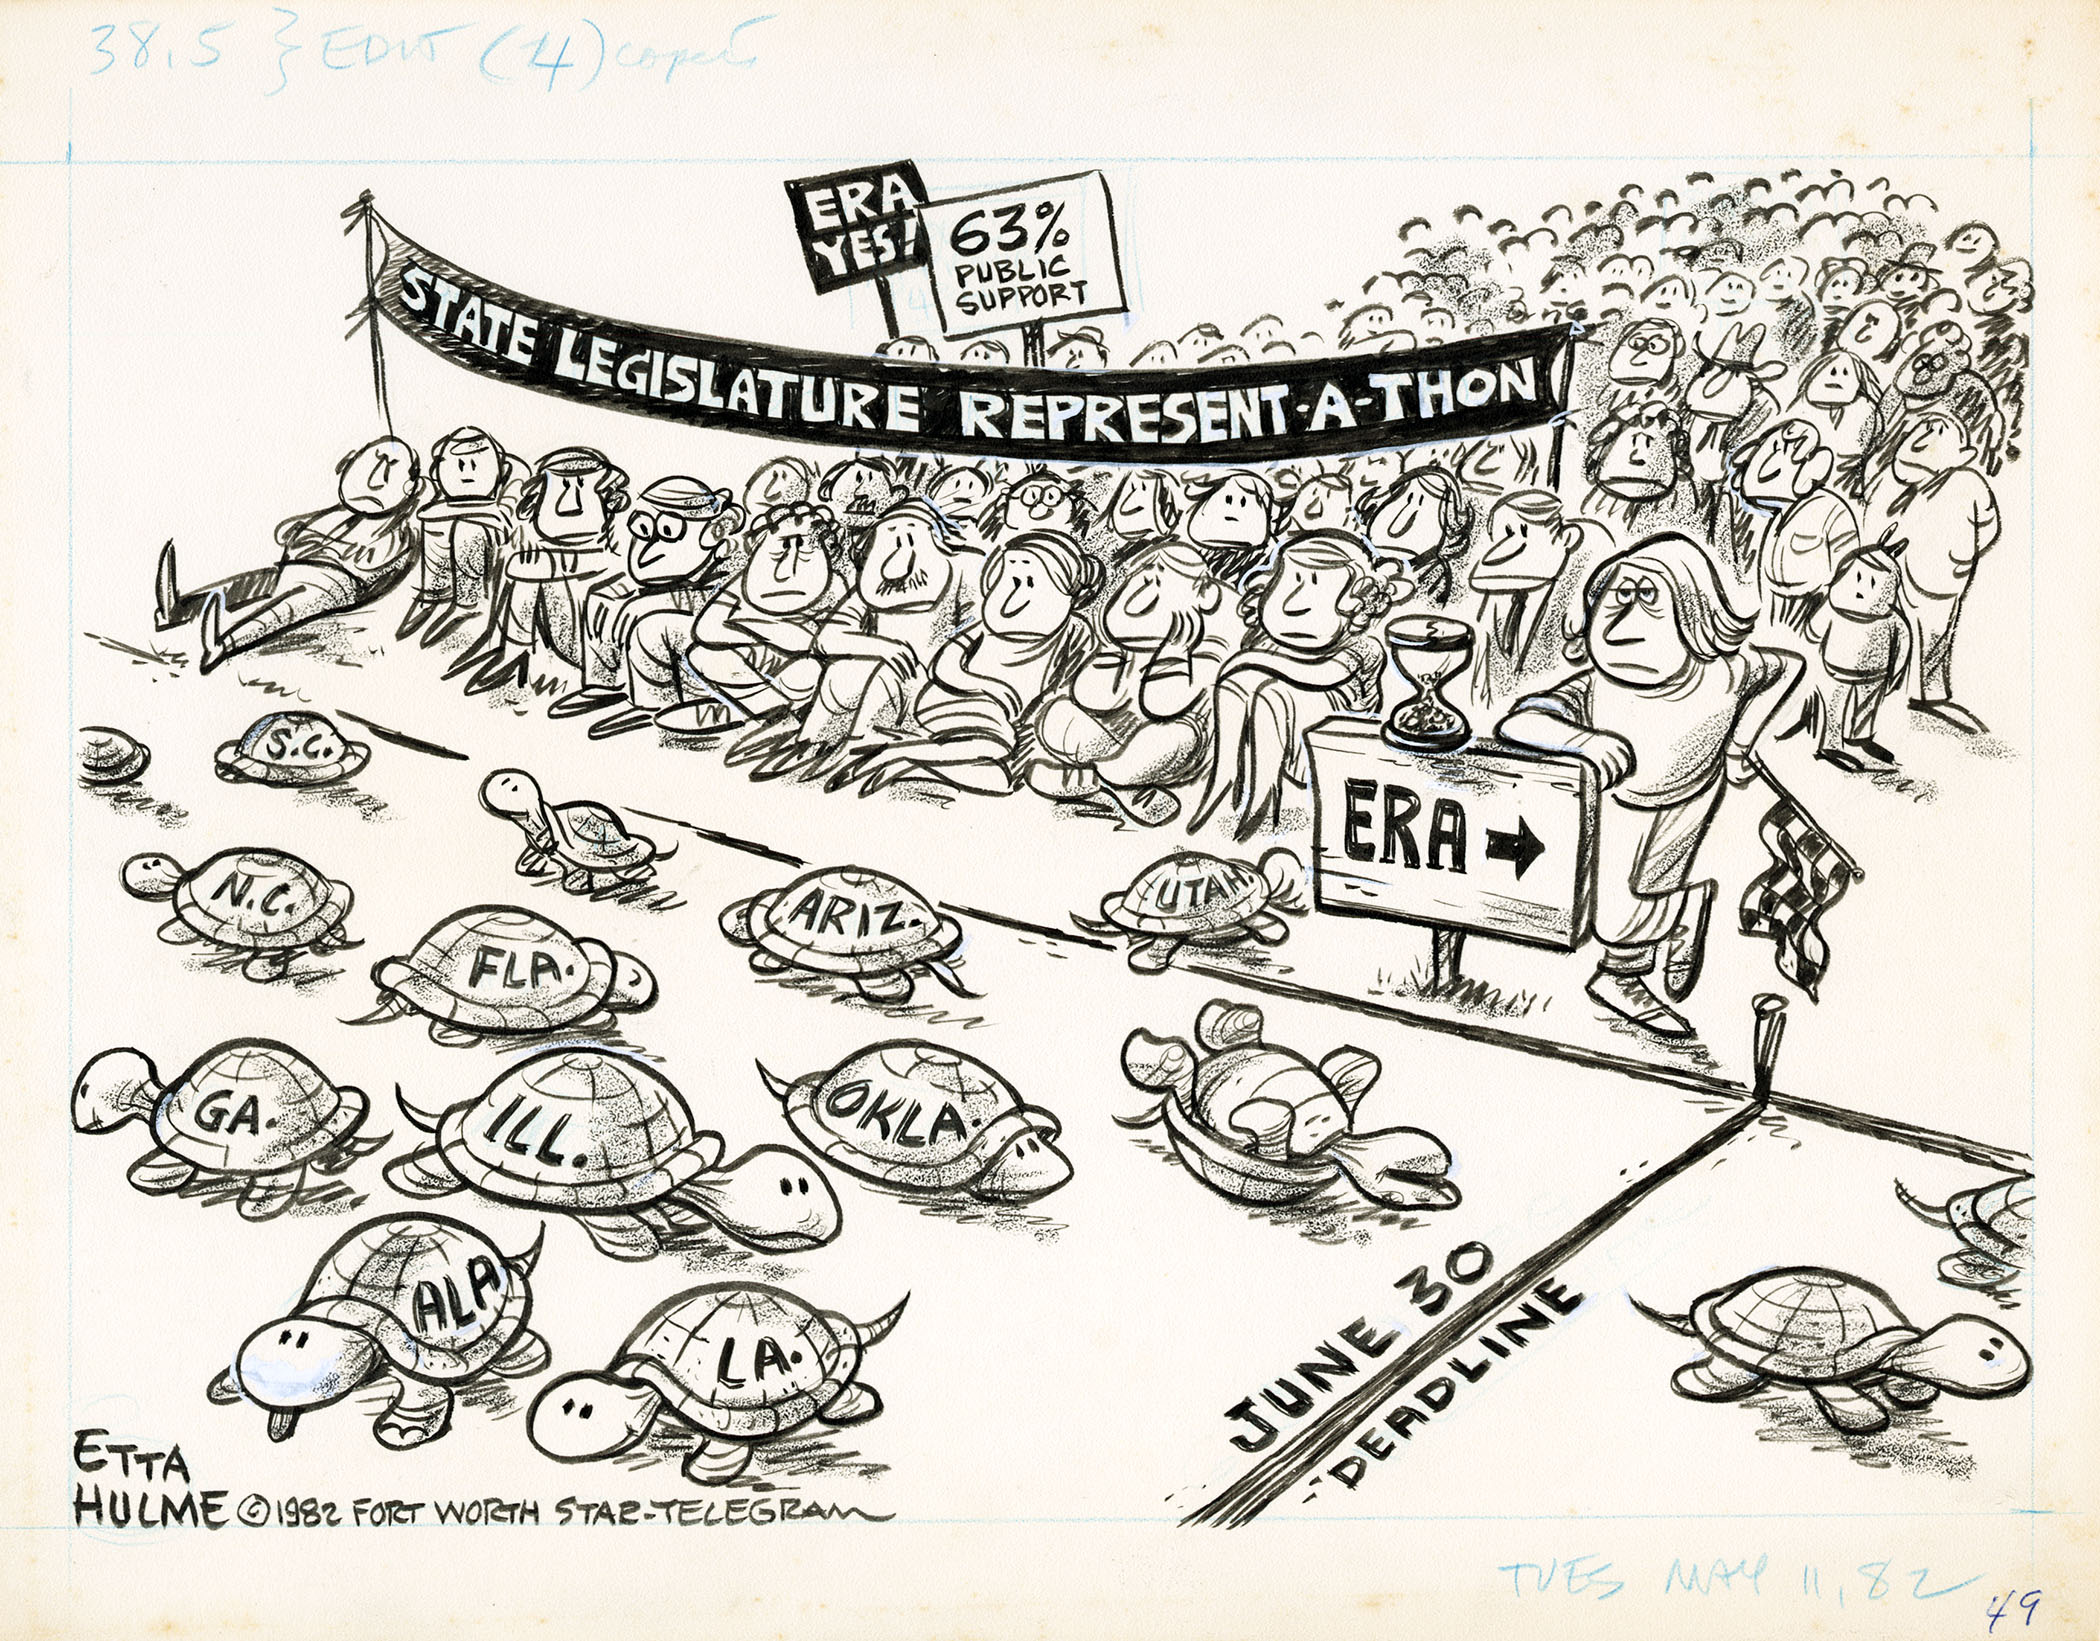 Editorial cartoon by Etta Hulme (1982) depicting a race for the Equal Rights Amendment (ERA) involving turtles that represent states that did not vote to ratify the ERA, which are seen approaching a finish line which reads “June 30 Deadline”